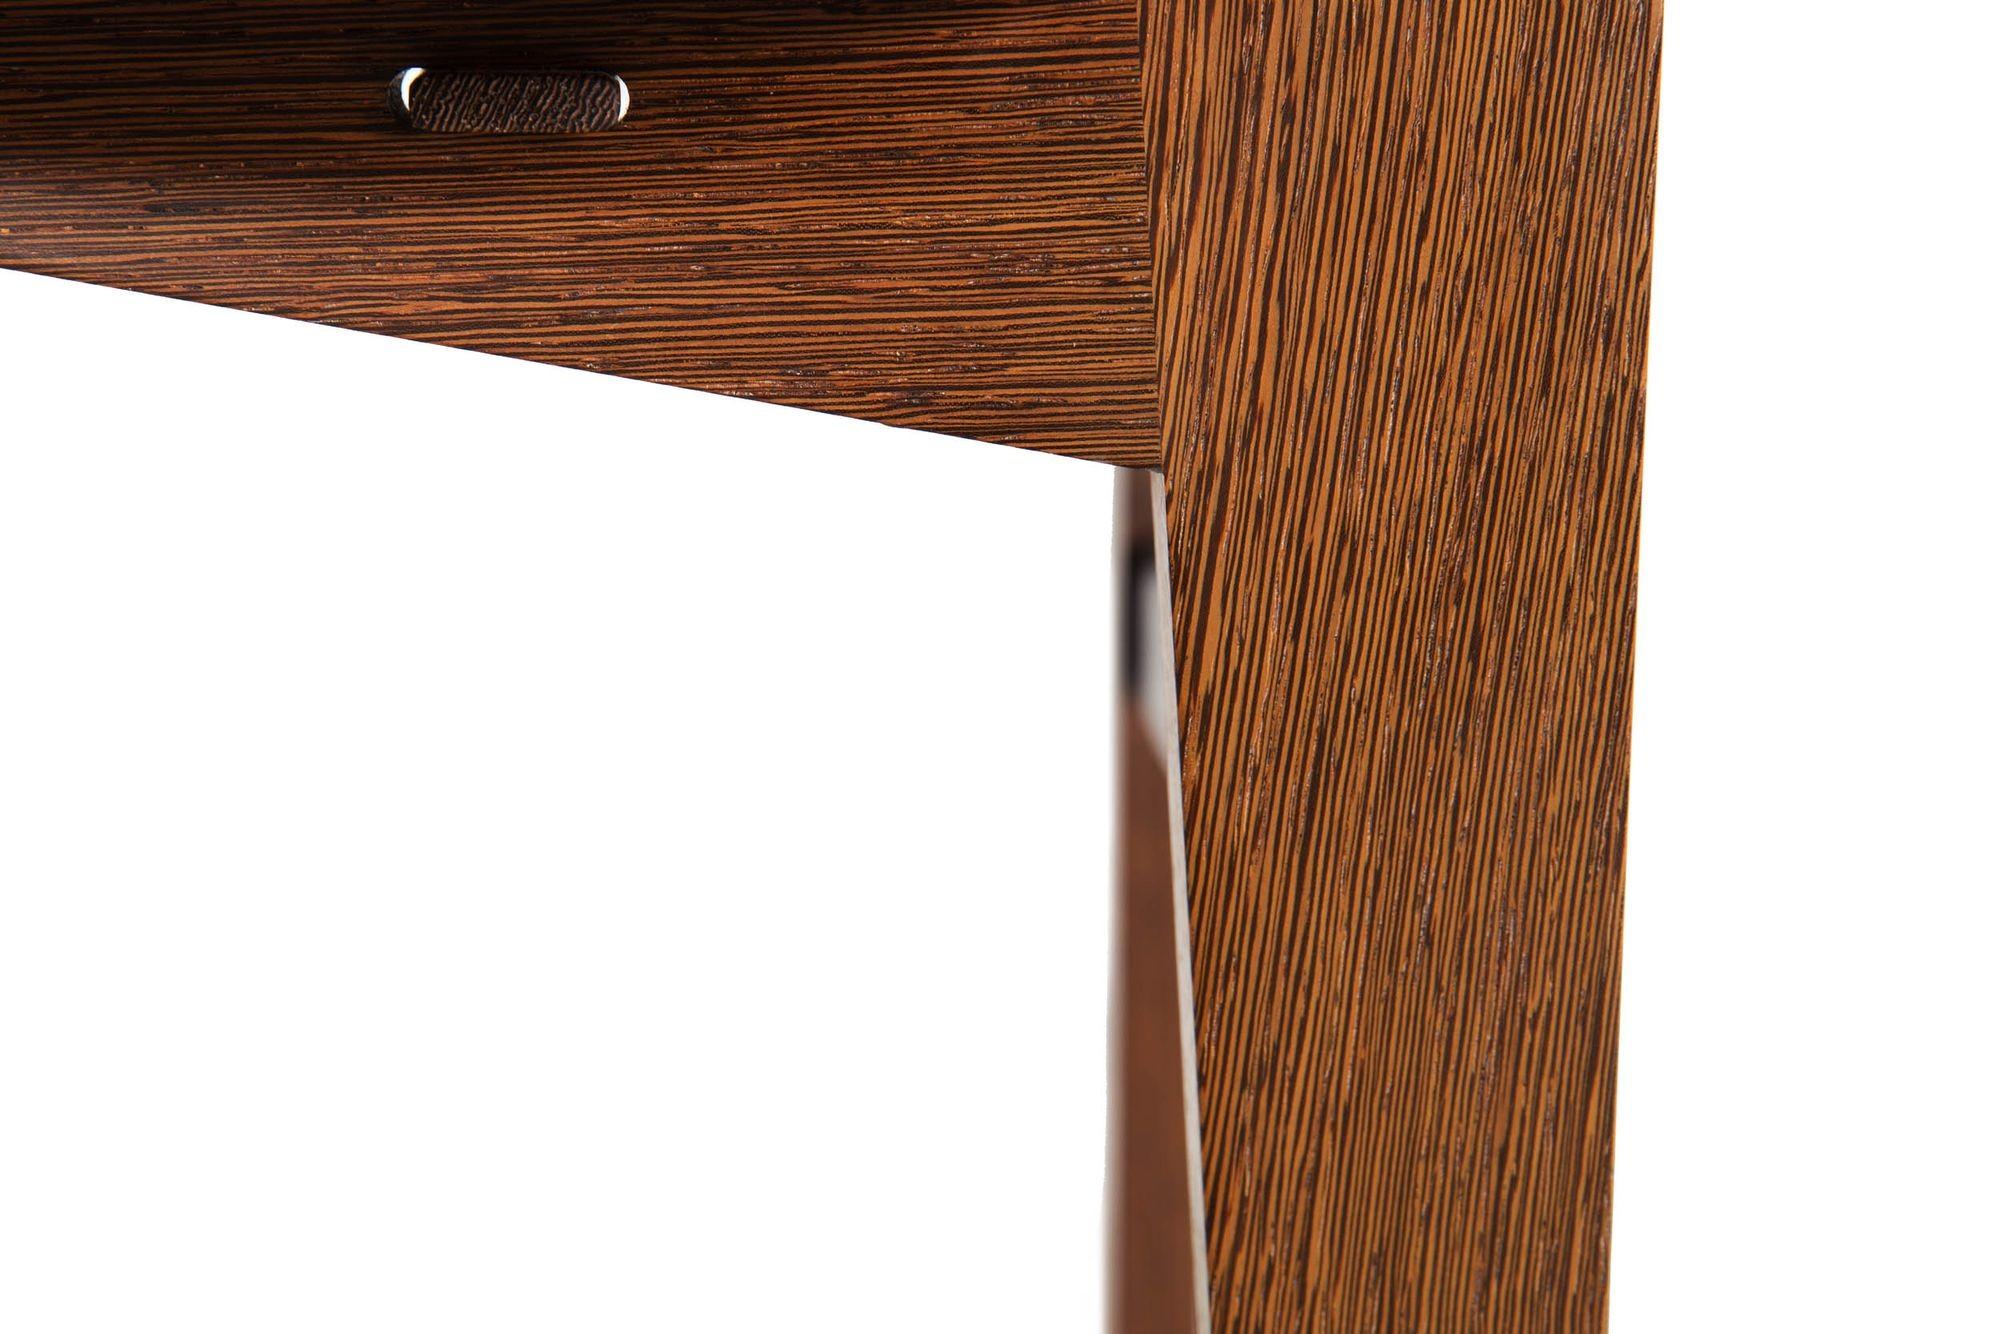 Post-Modern Ebony Hardwood Accent Table w/ Dovetailed Corners, circa 1987 For Sale 13